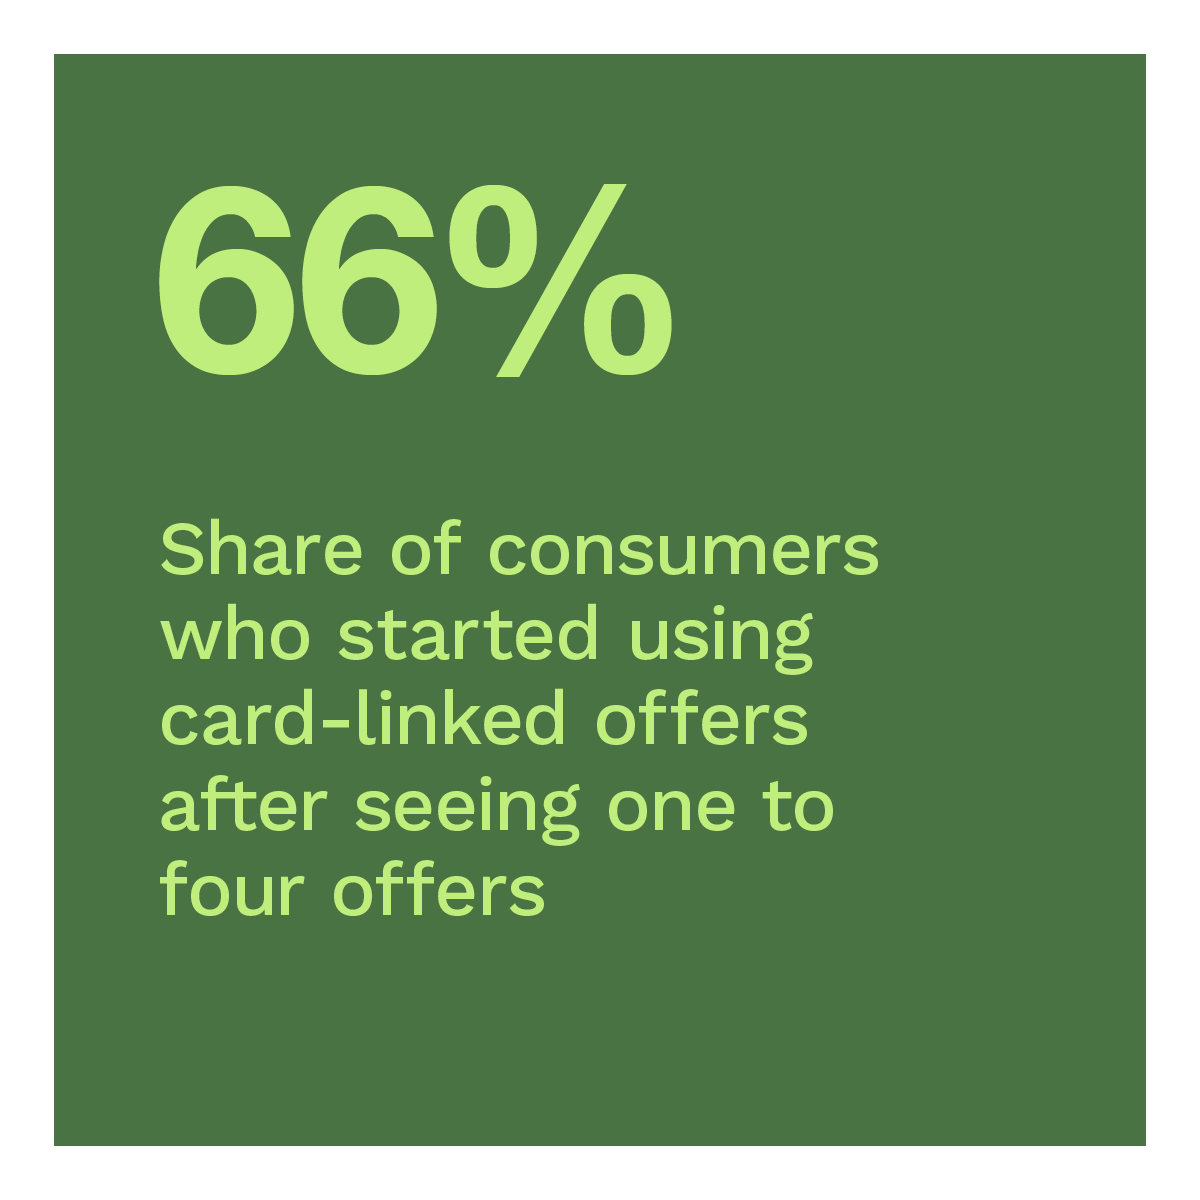 66%: Share of consumers who started using card-linked offers after seeing one to four offers